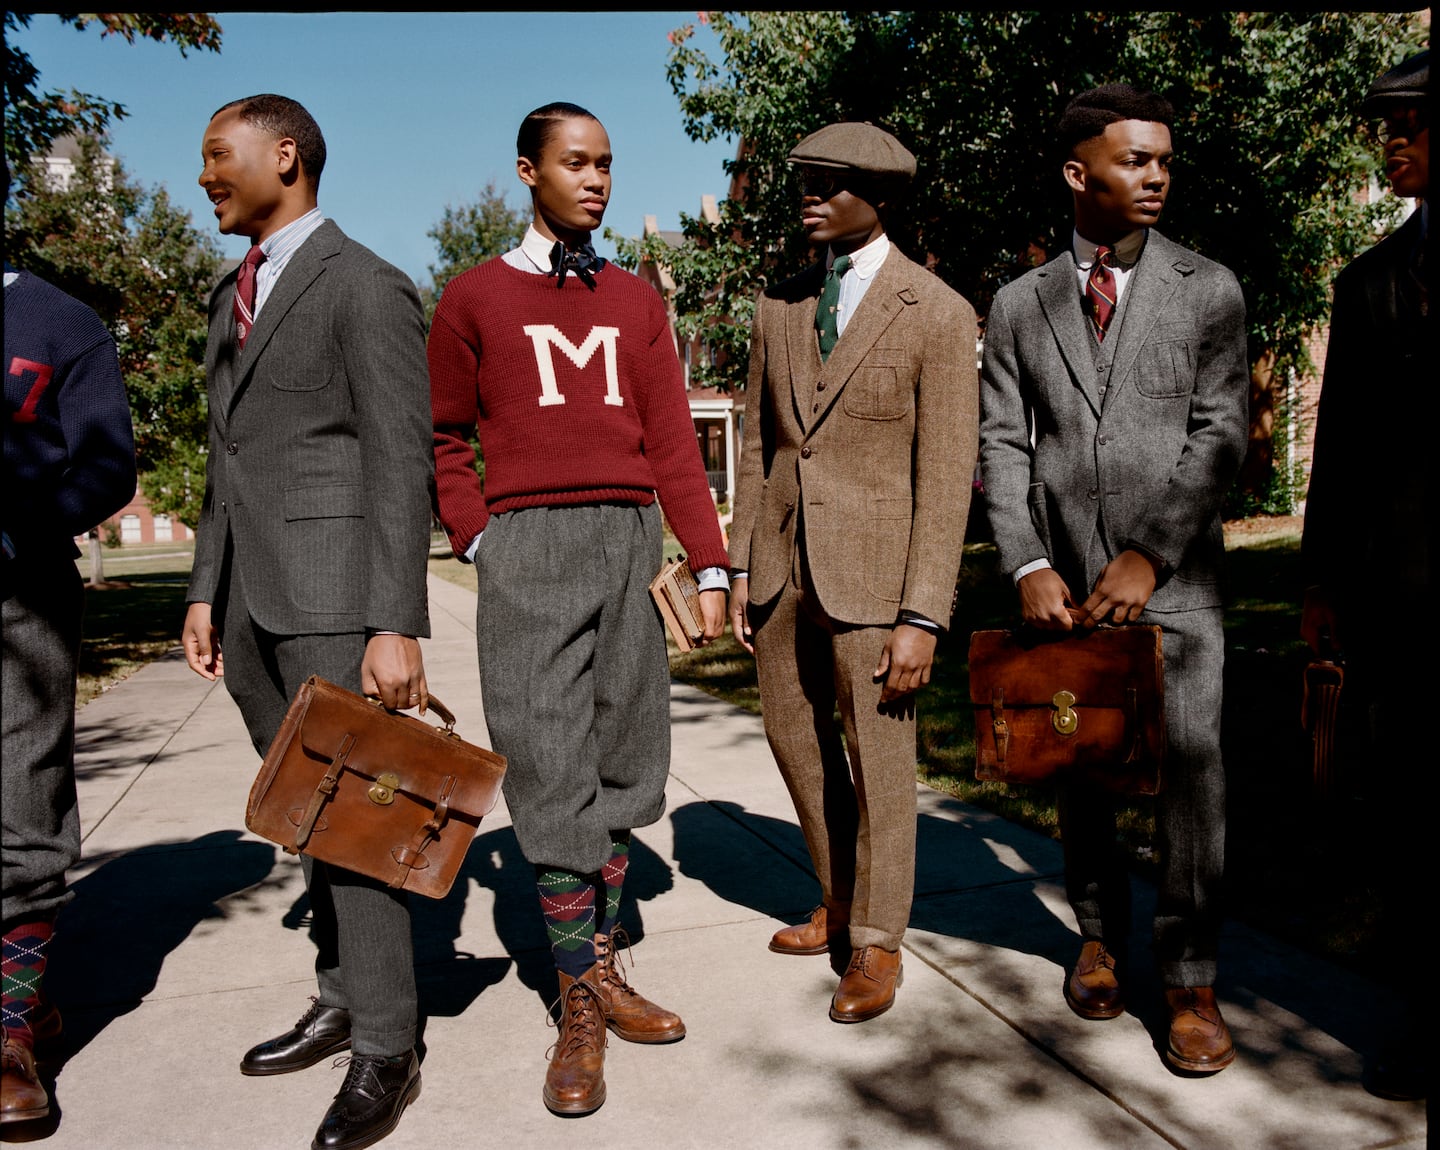 The Polo Ralph Lauren Exclusively for Morehouse and Spelman Colleges Collection references styles worn by HBCU students from the 1920s to 1950s.